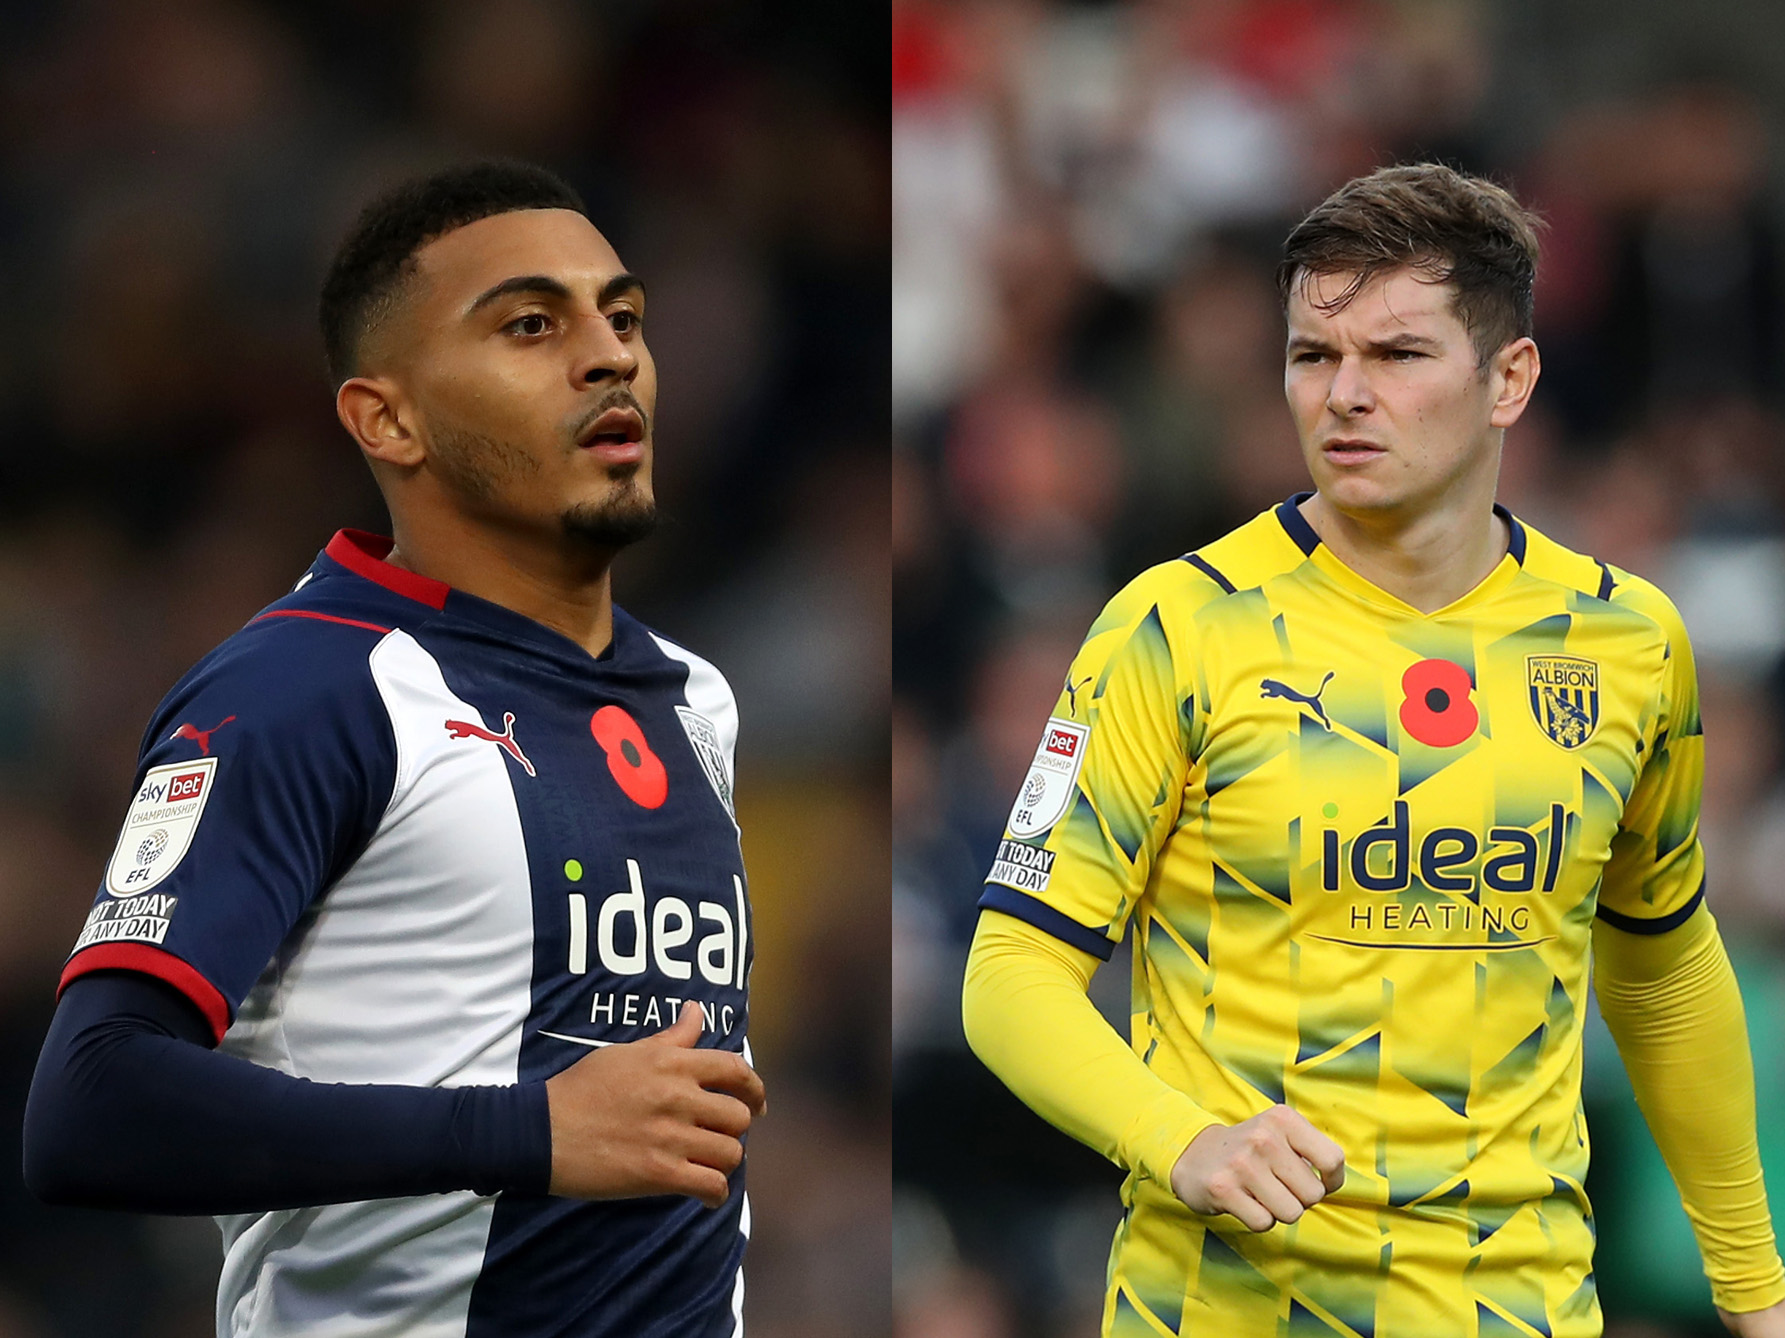 Poppy-emblazoned shirts from Albion’s Sky Bet Championship games against Fulham and Middlesbrough are still available to bid on